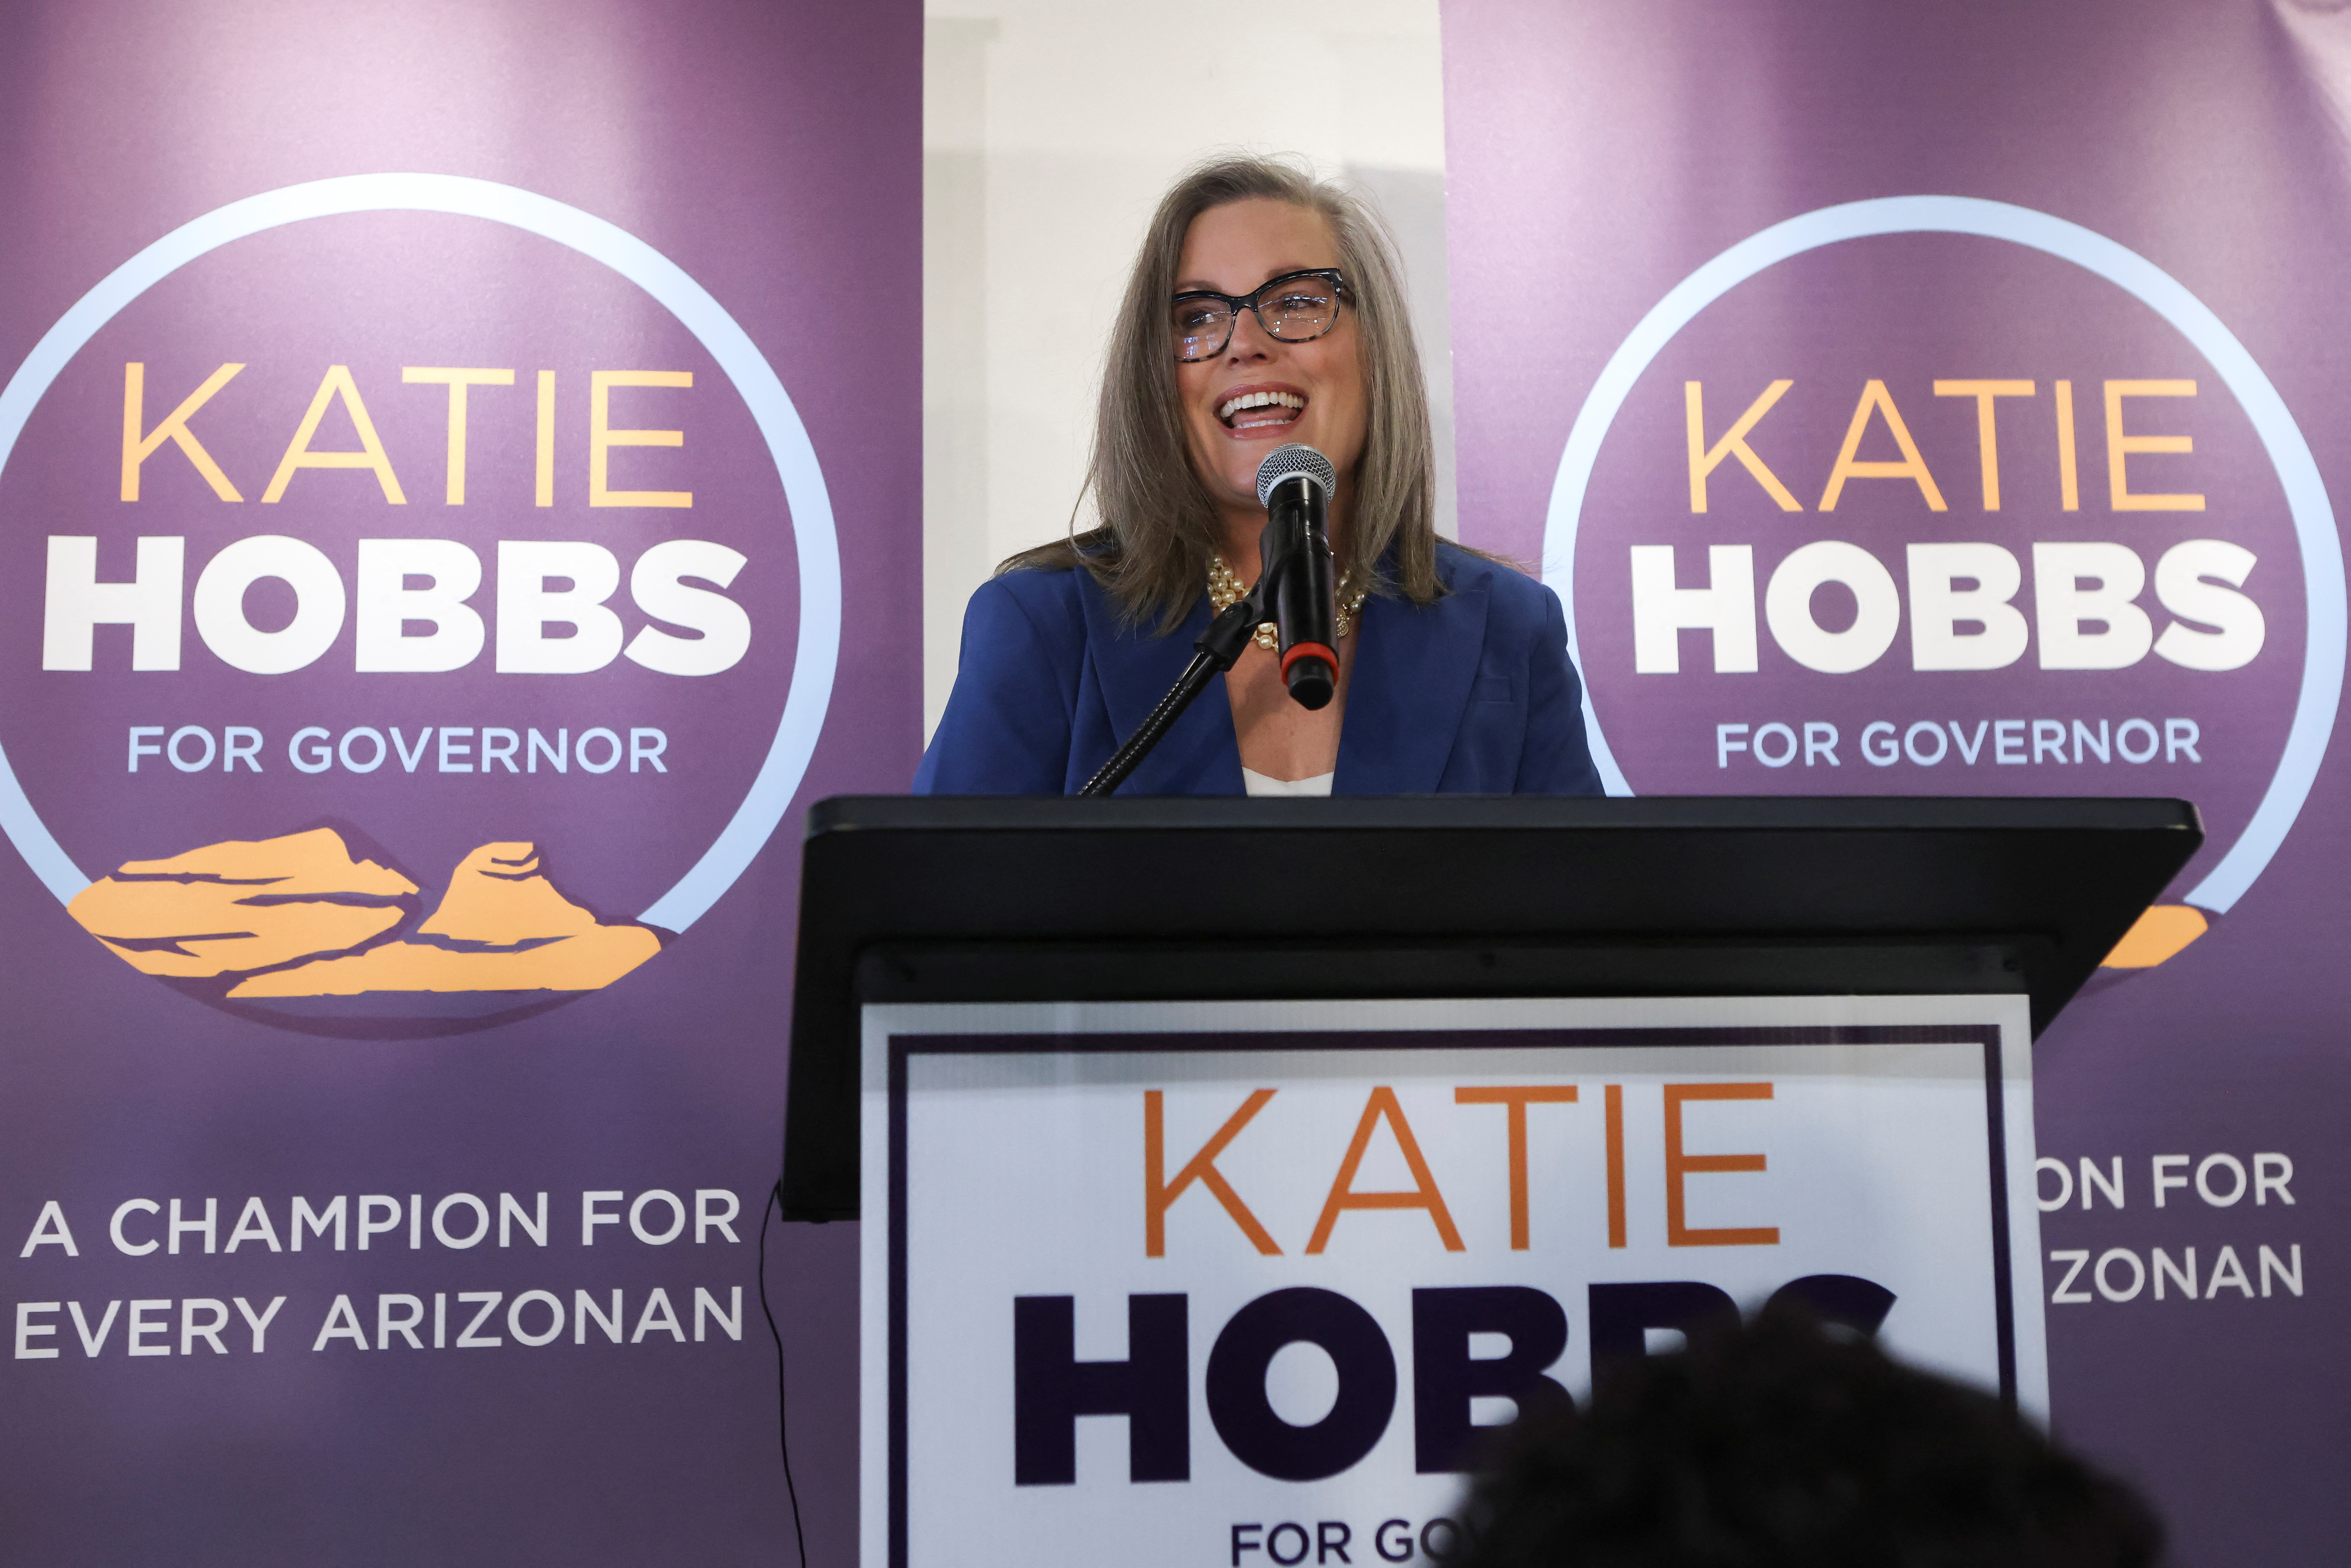 Democrat Katie Hobbs gives a victory speech after winning the race to become Arizona's next governor against Kari Lake in the midterm elections in Phoenix, Arizona, U.S., November 15, 2022.  REUTERS/Jim Urquhart